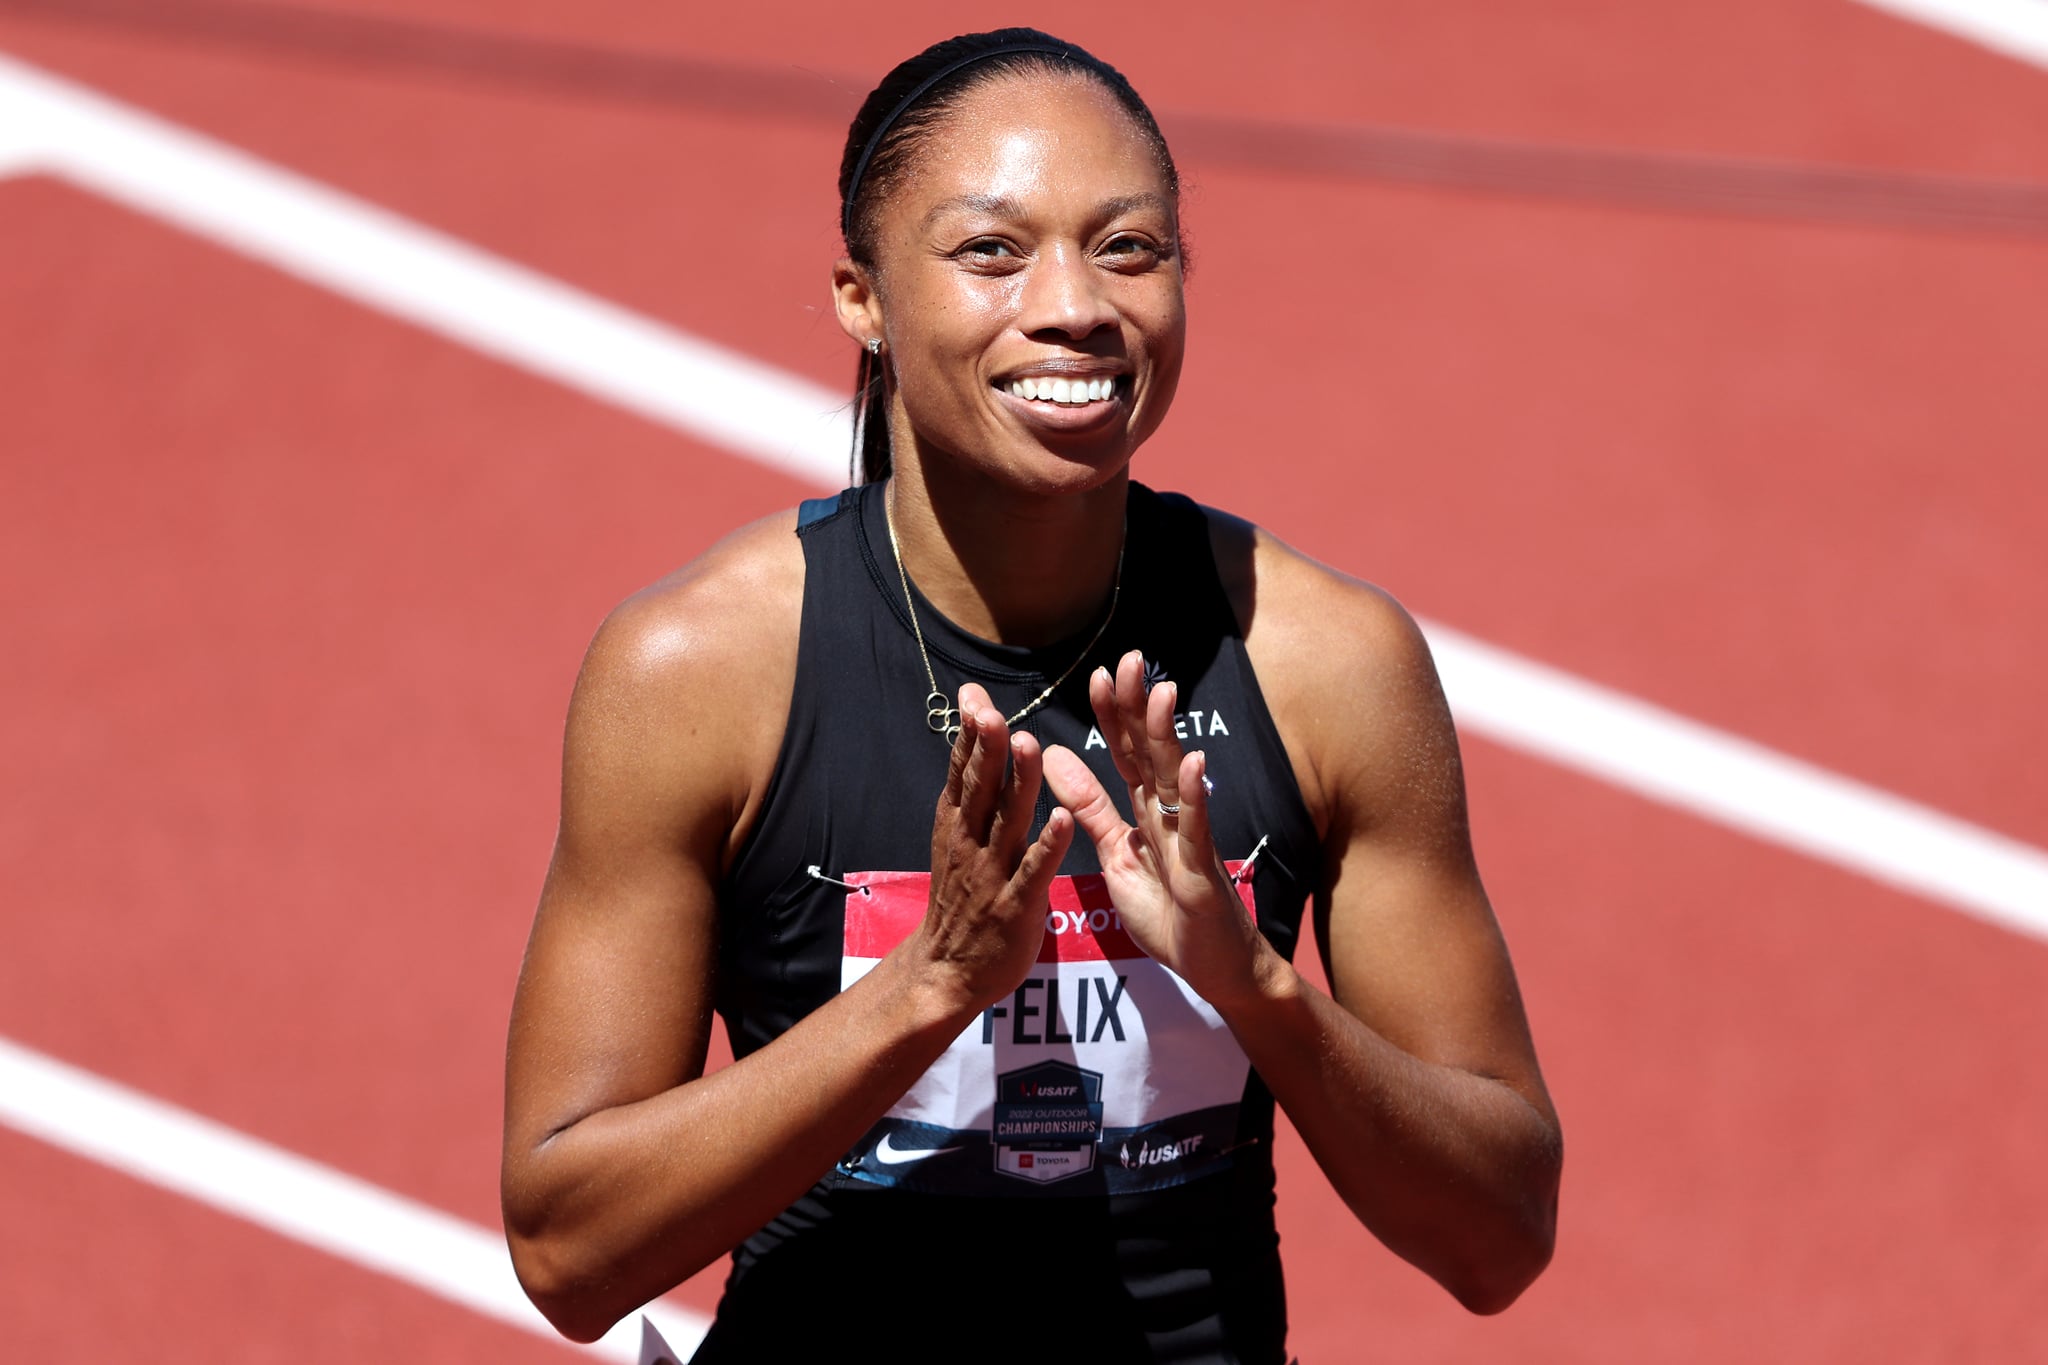 EUGENE, OREGON - JUNE 24: Allyson Felix acknowledges the crowd after she competed in the Women 400 Meter Dash Final during the USATF Championships at Hayward Field on June 24, 2022 in Eugene, Oregon. (Photo by Sean M. Haffey/Getty Images)